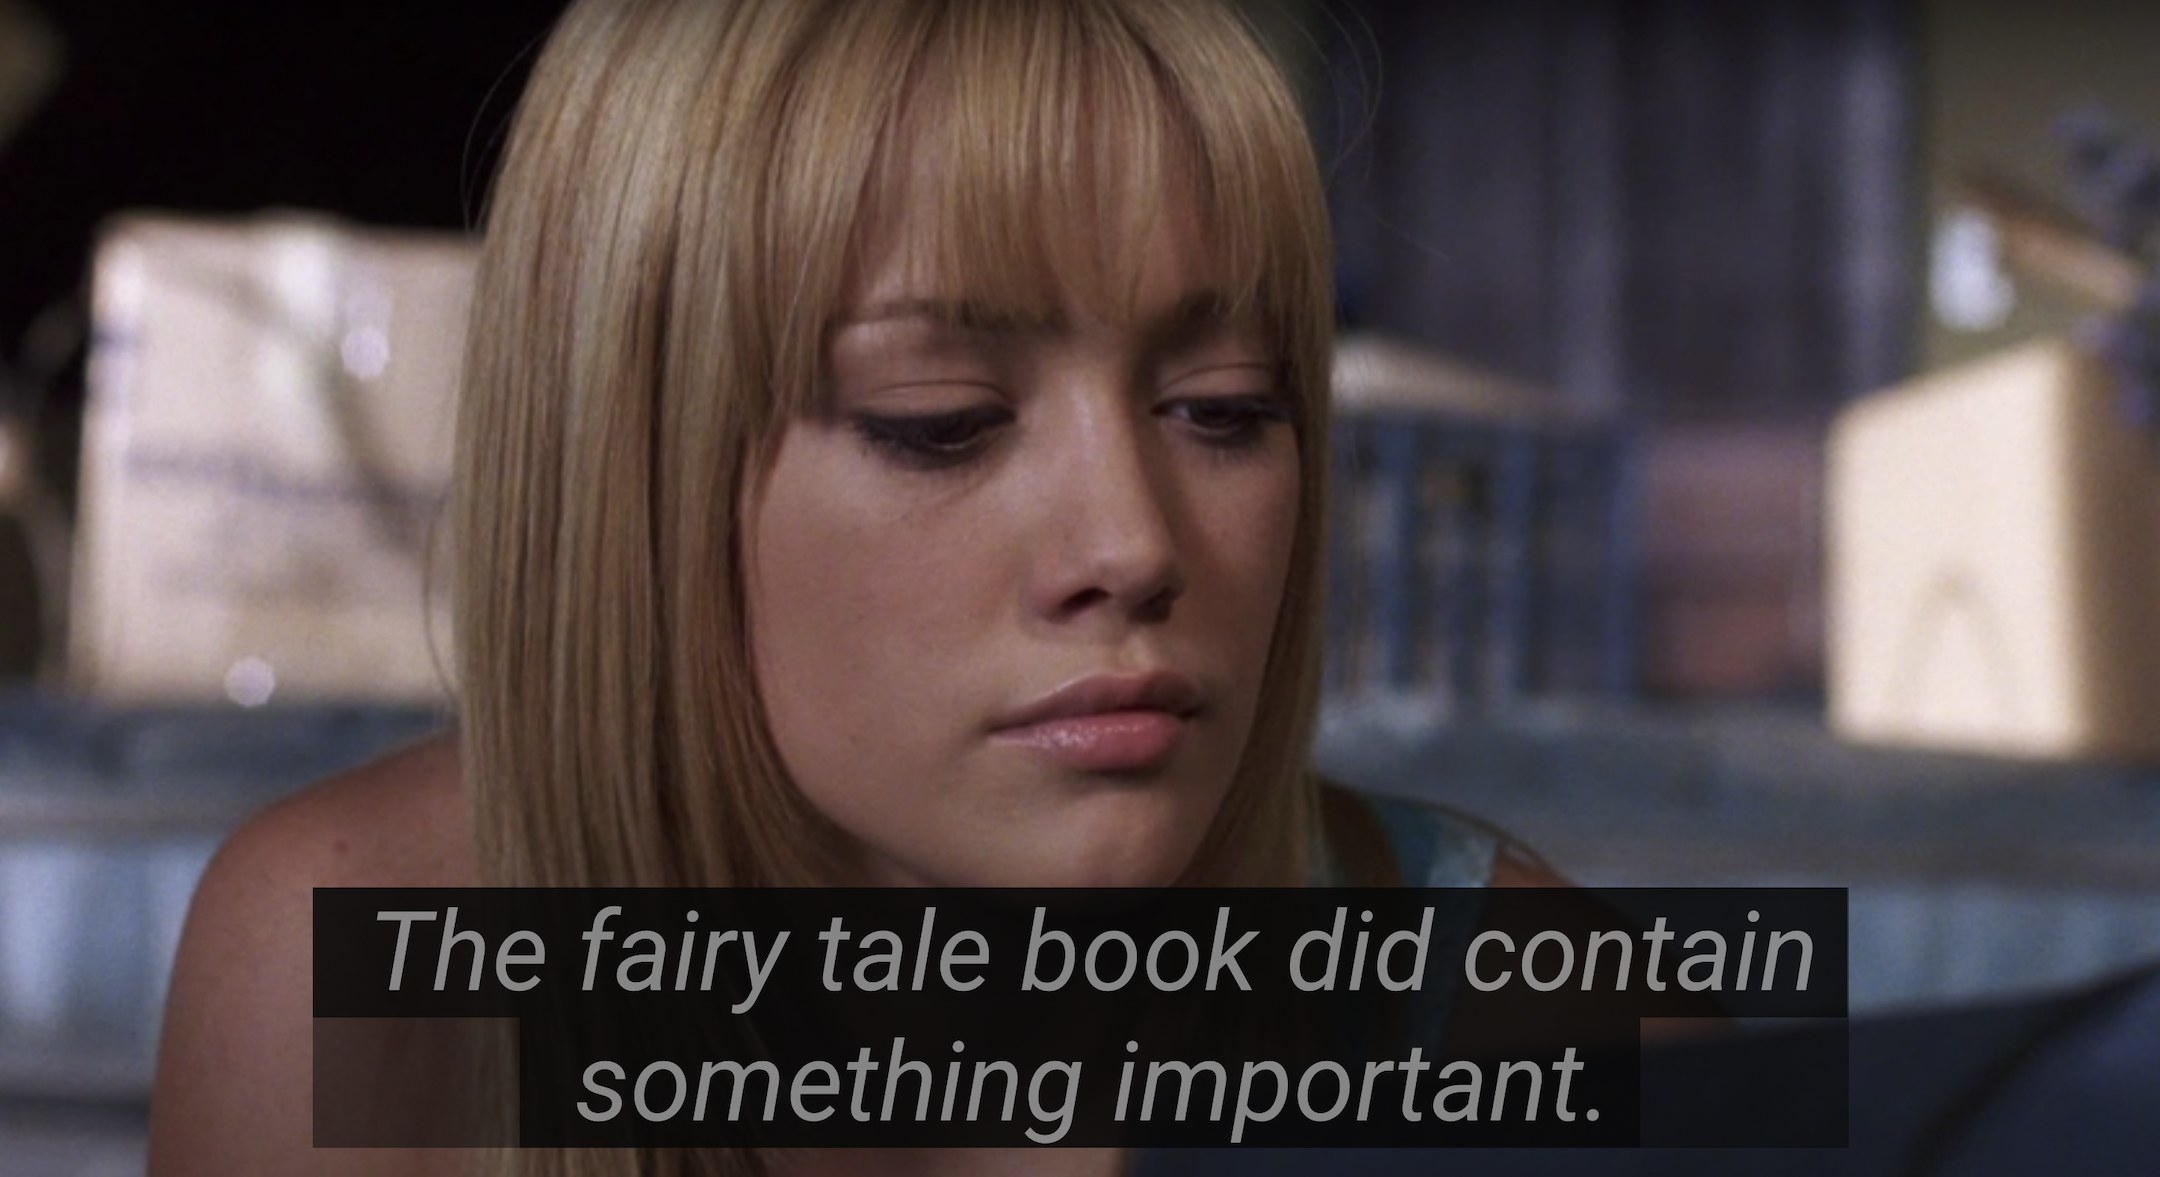 In voiceover, Sam says, the fairytale book did contain something important